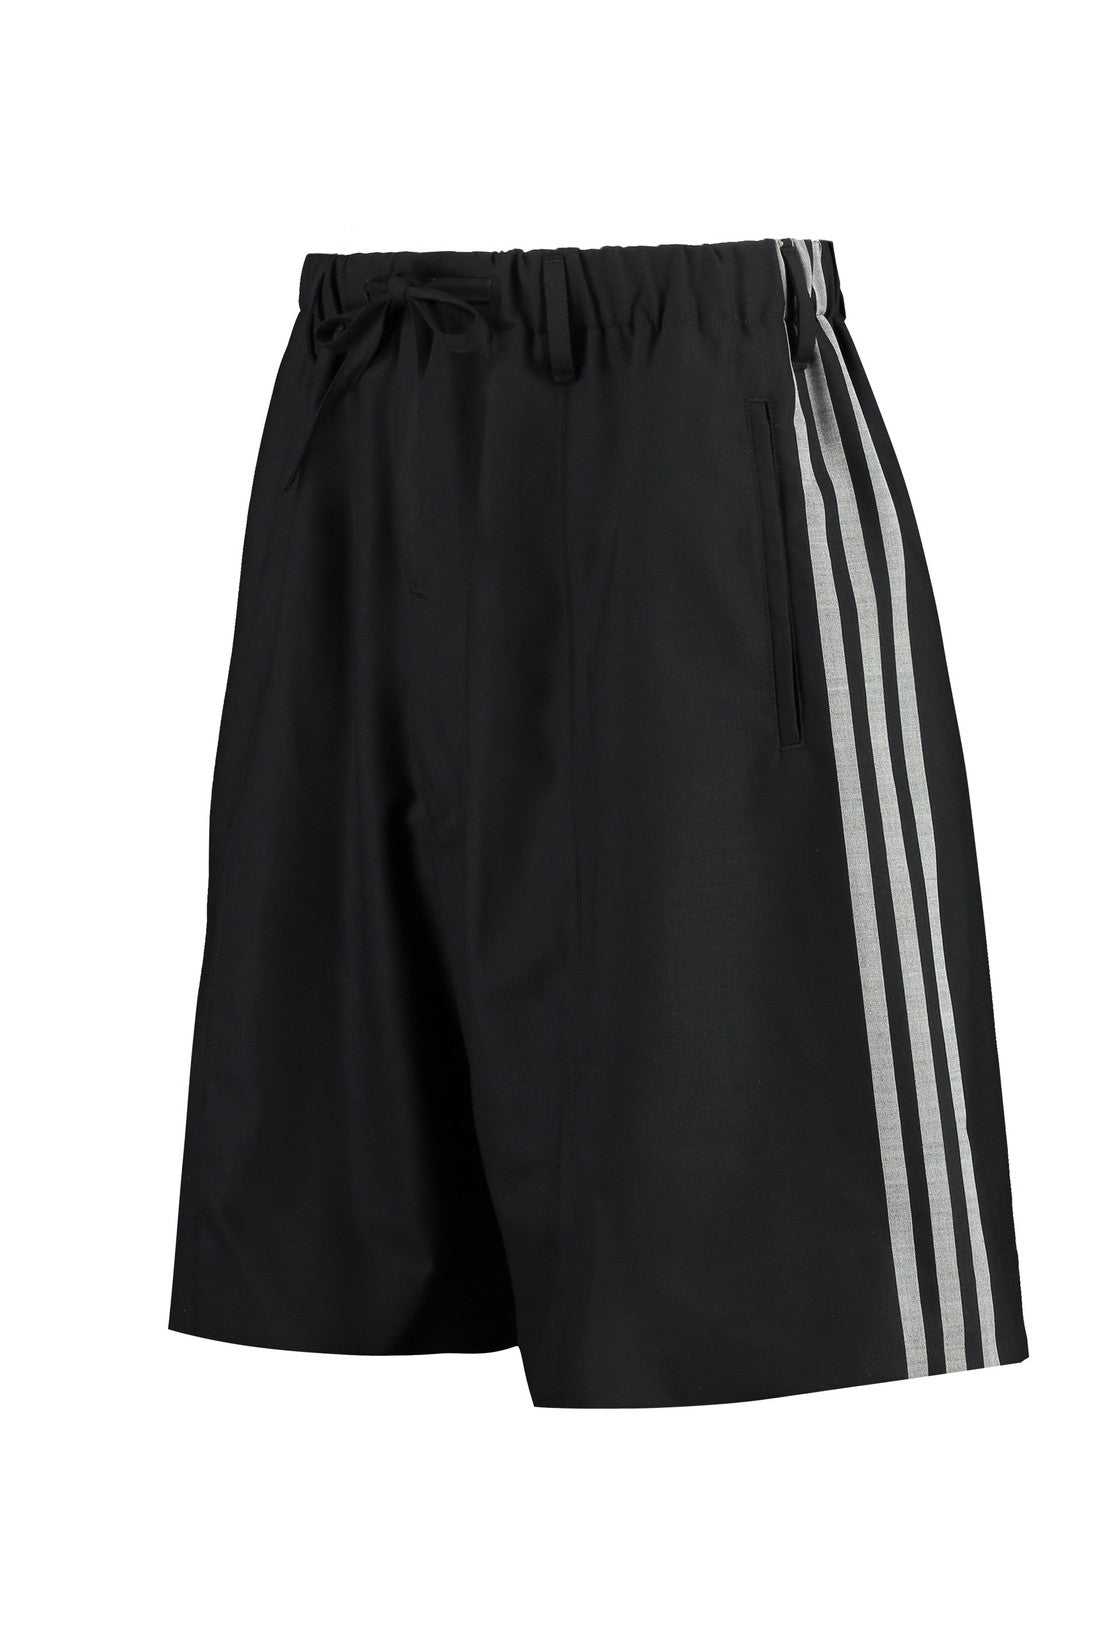 adidas Y-3-OUTLET-SALE-Wool blend shorts-ARCHIVIST